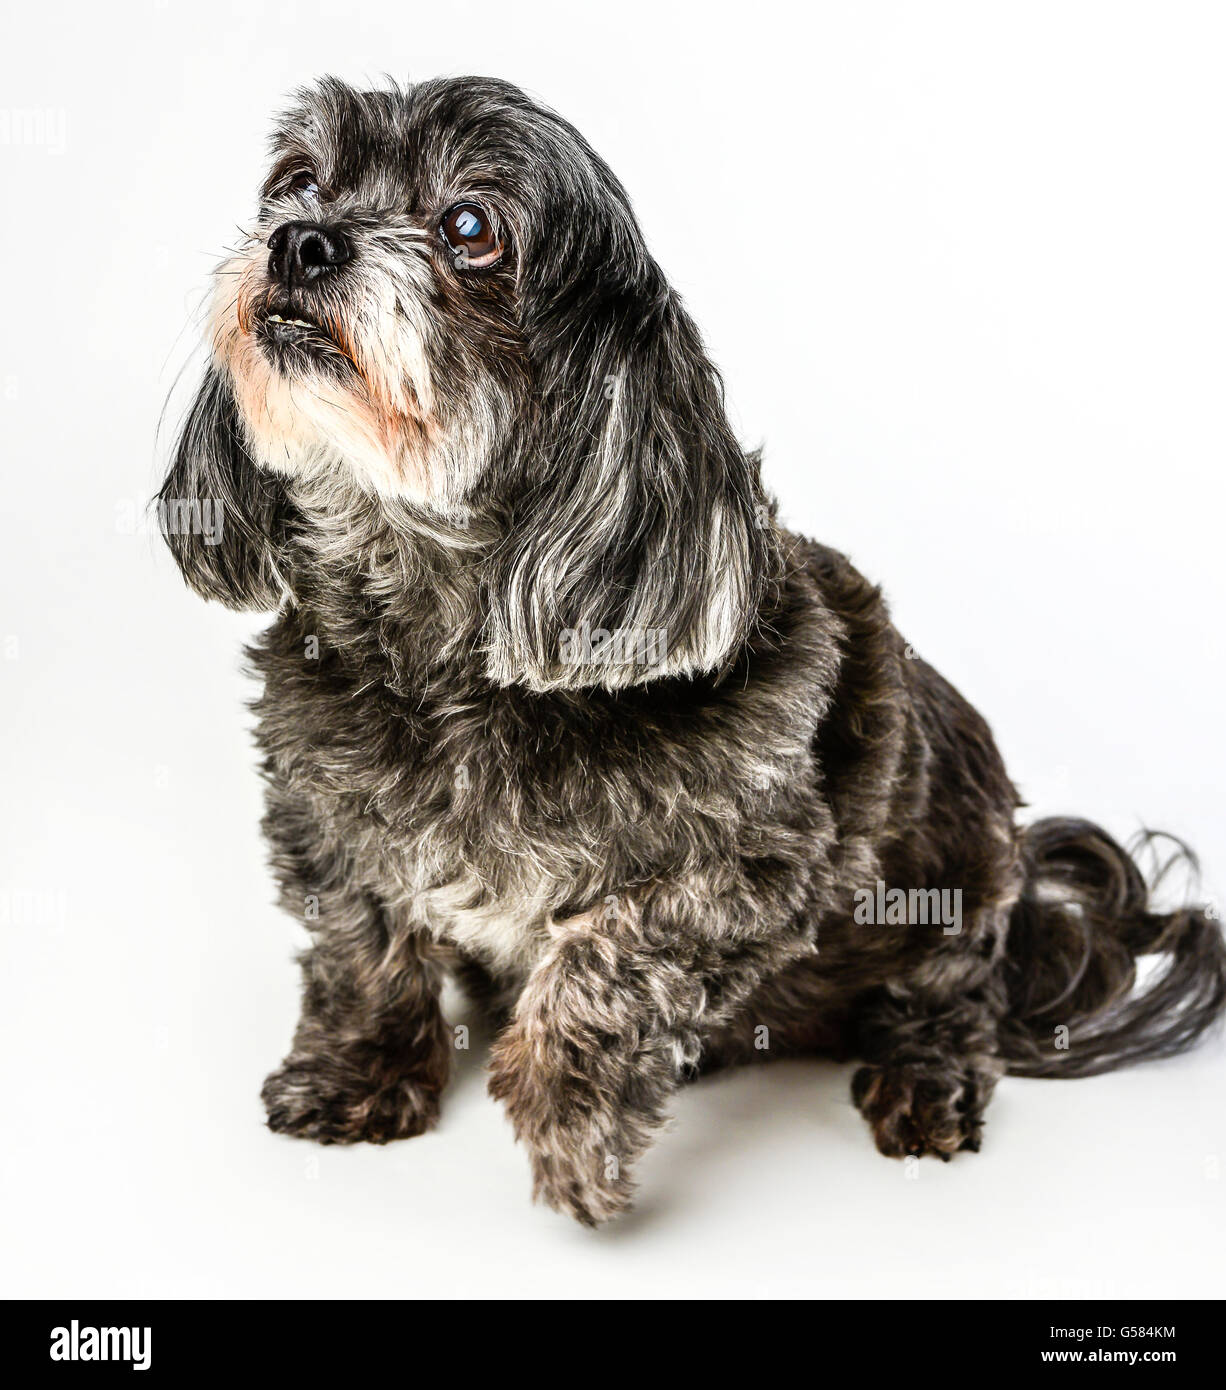 An adorable dark tri-colored mixed breed small dog posing with curious expression with front paw lifted on white background Stock Photo